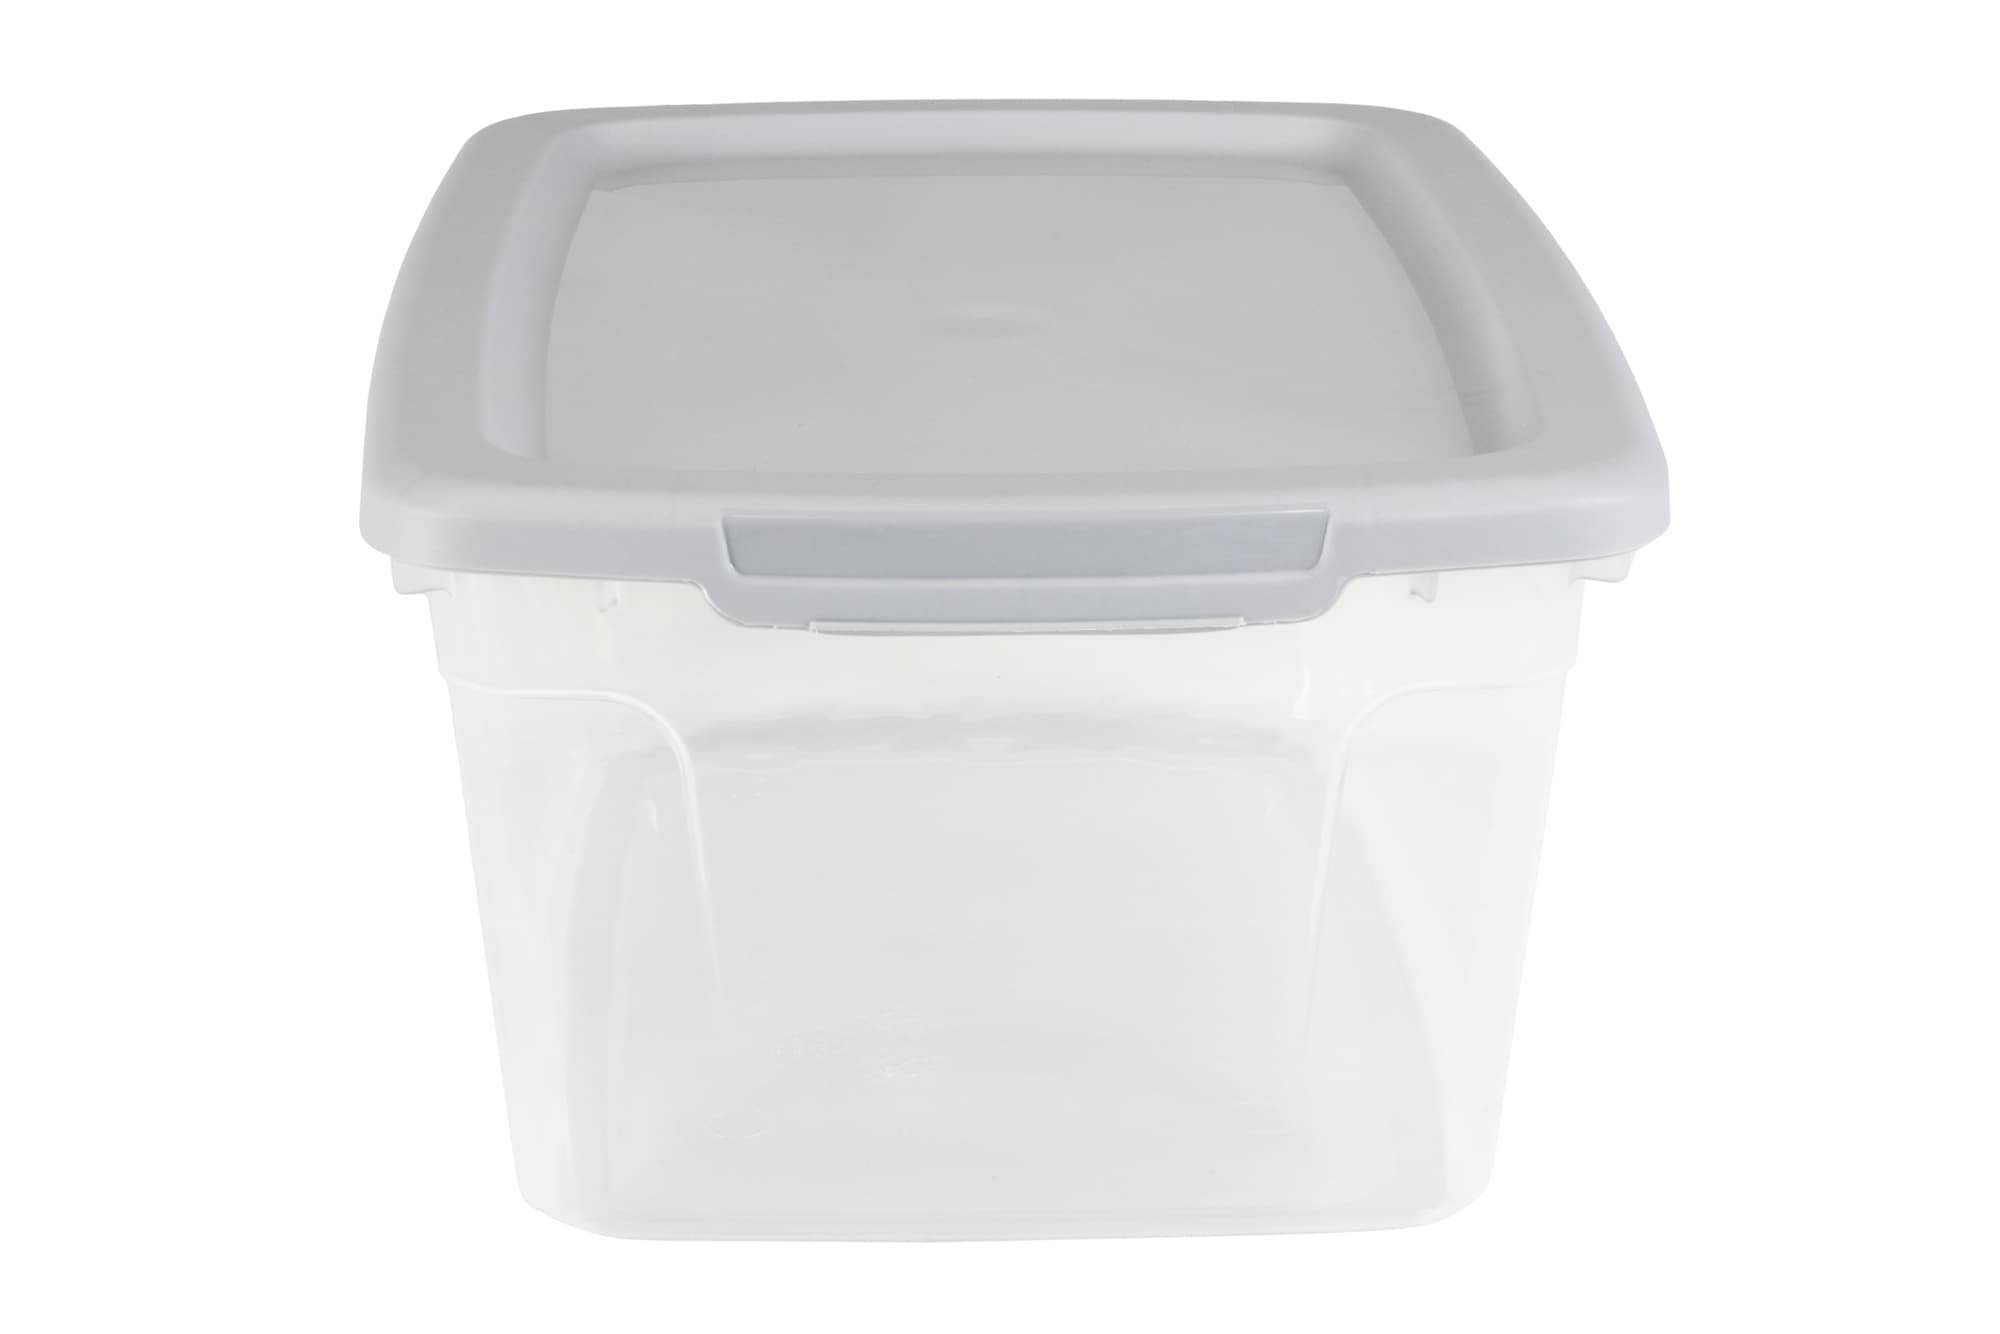 Project Source 1.5-Gallon (6-Quart) Clear Tote with Standard Snap Lid